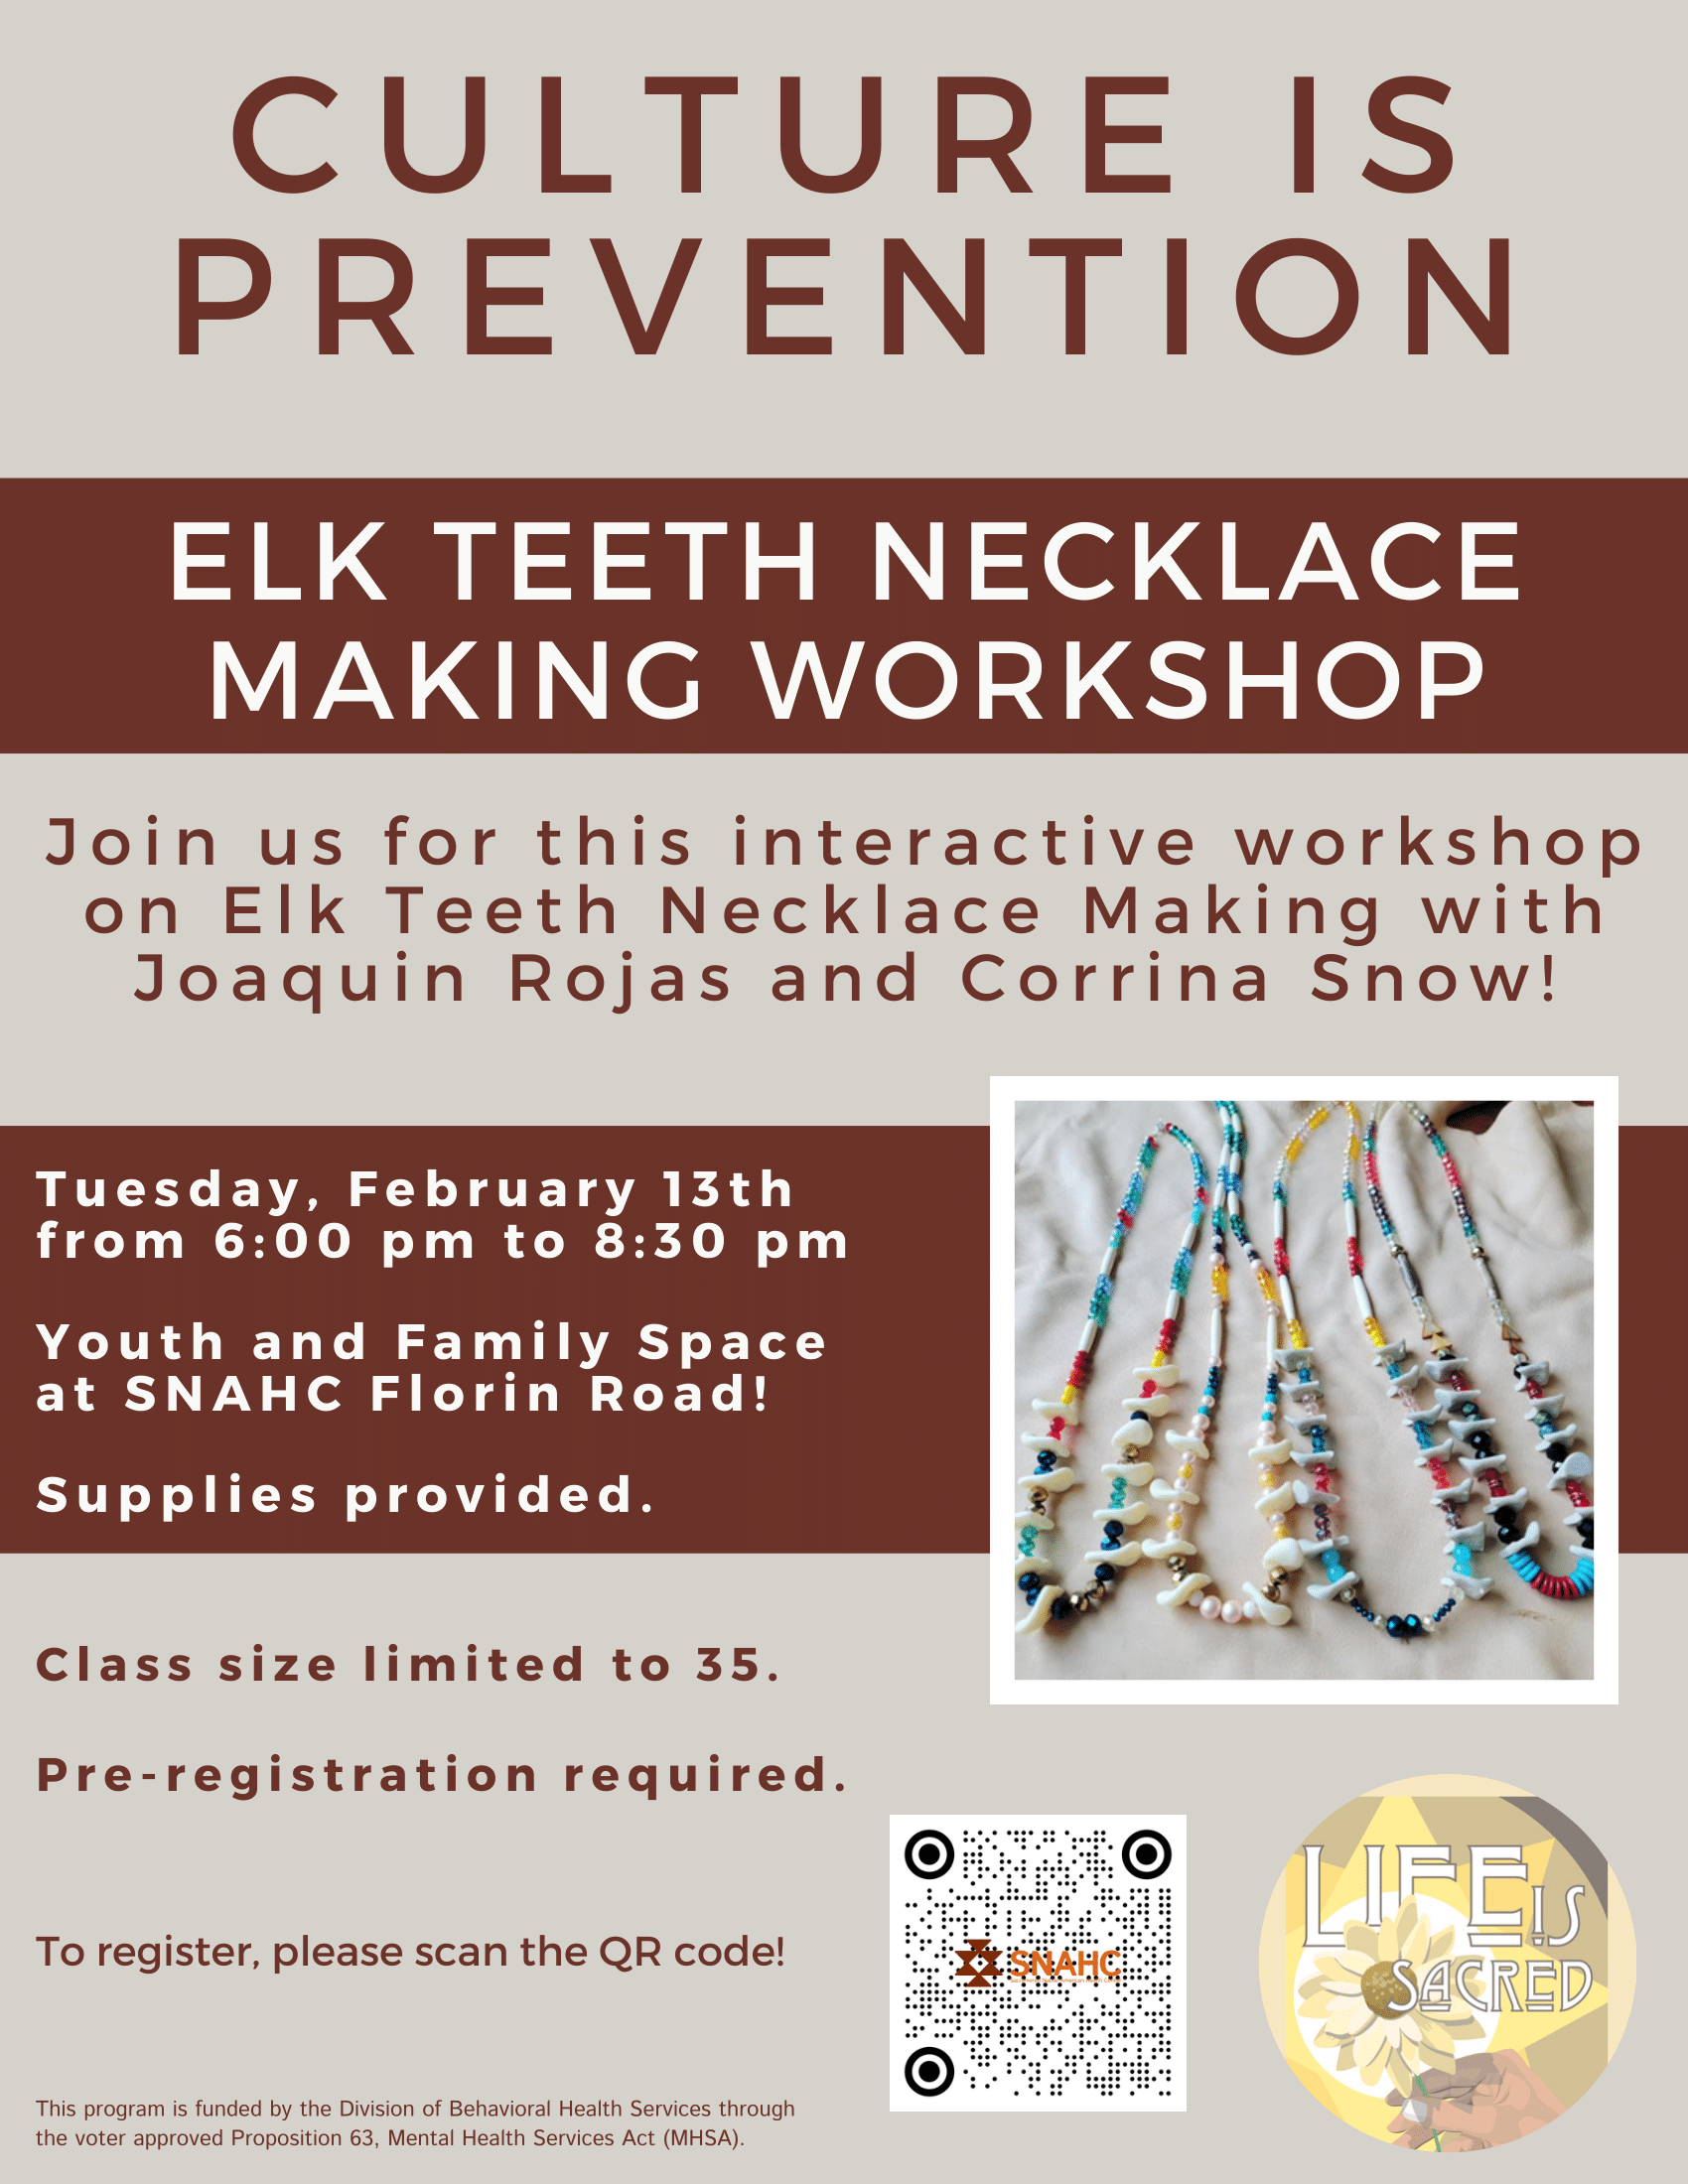 Elk teeth necklace making workshop flyer Taking place Tuesday, February 13th from 6:00 - 6:30 pm. Class size limited to 35 participants pre-registration is required.